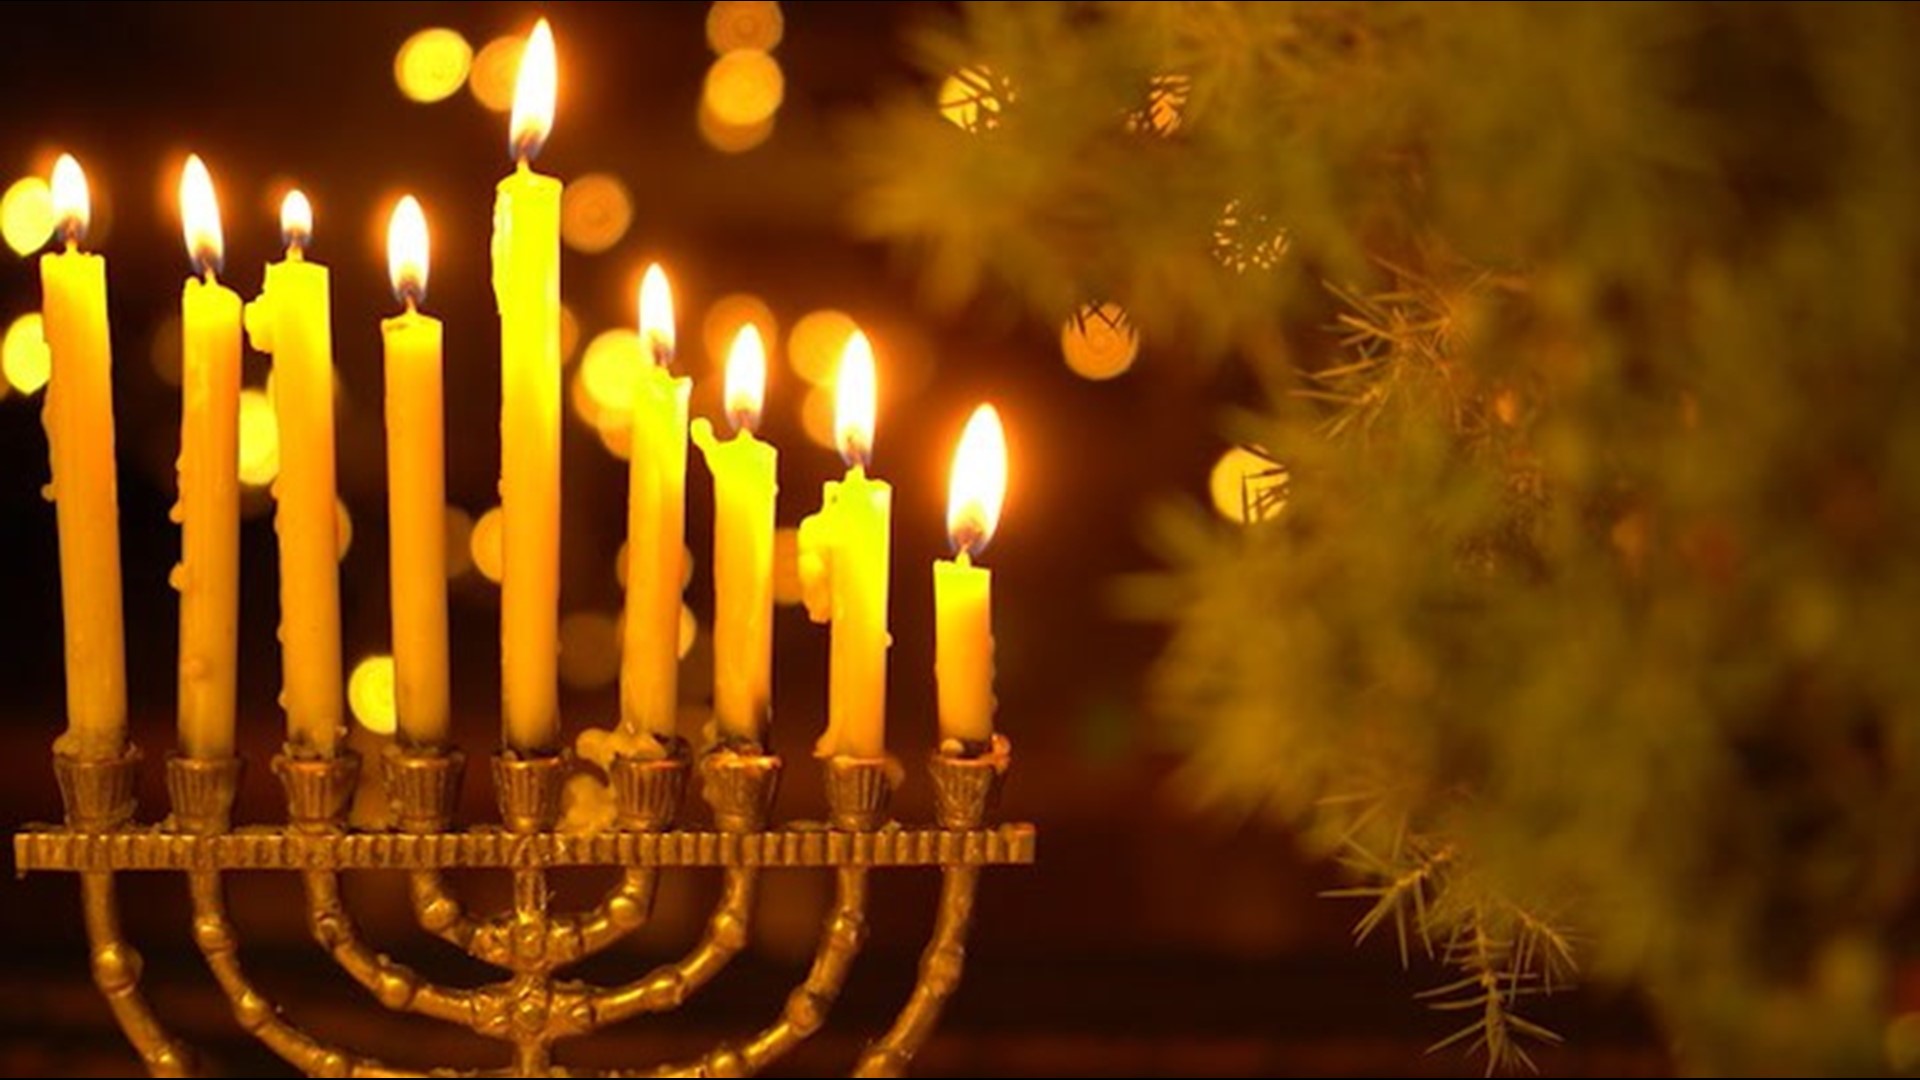 When celebrating Hanukkah, here are some important menorah fire safety precautions to keep in mind.